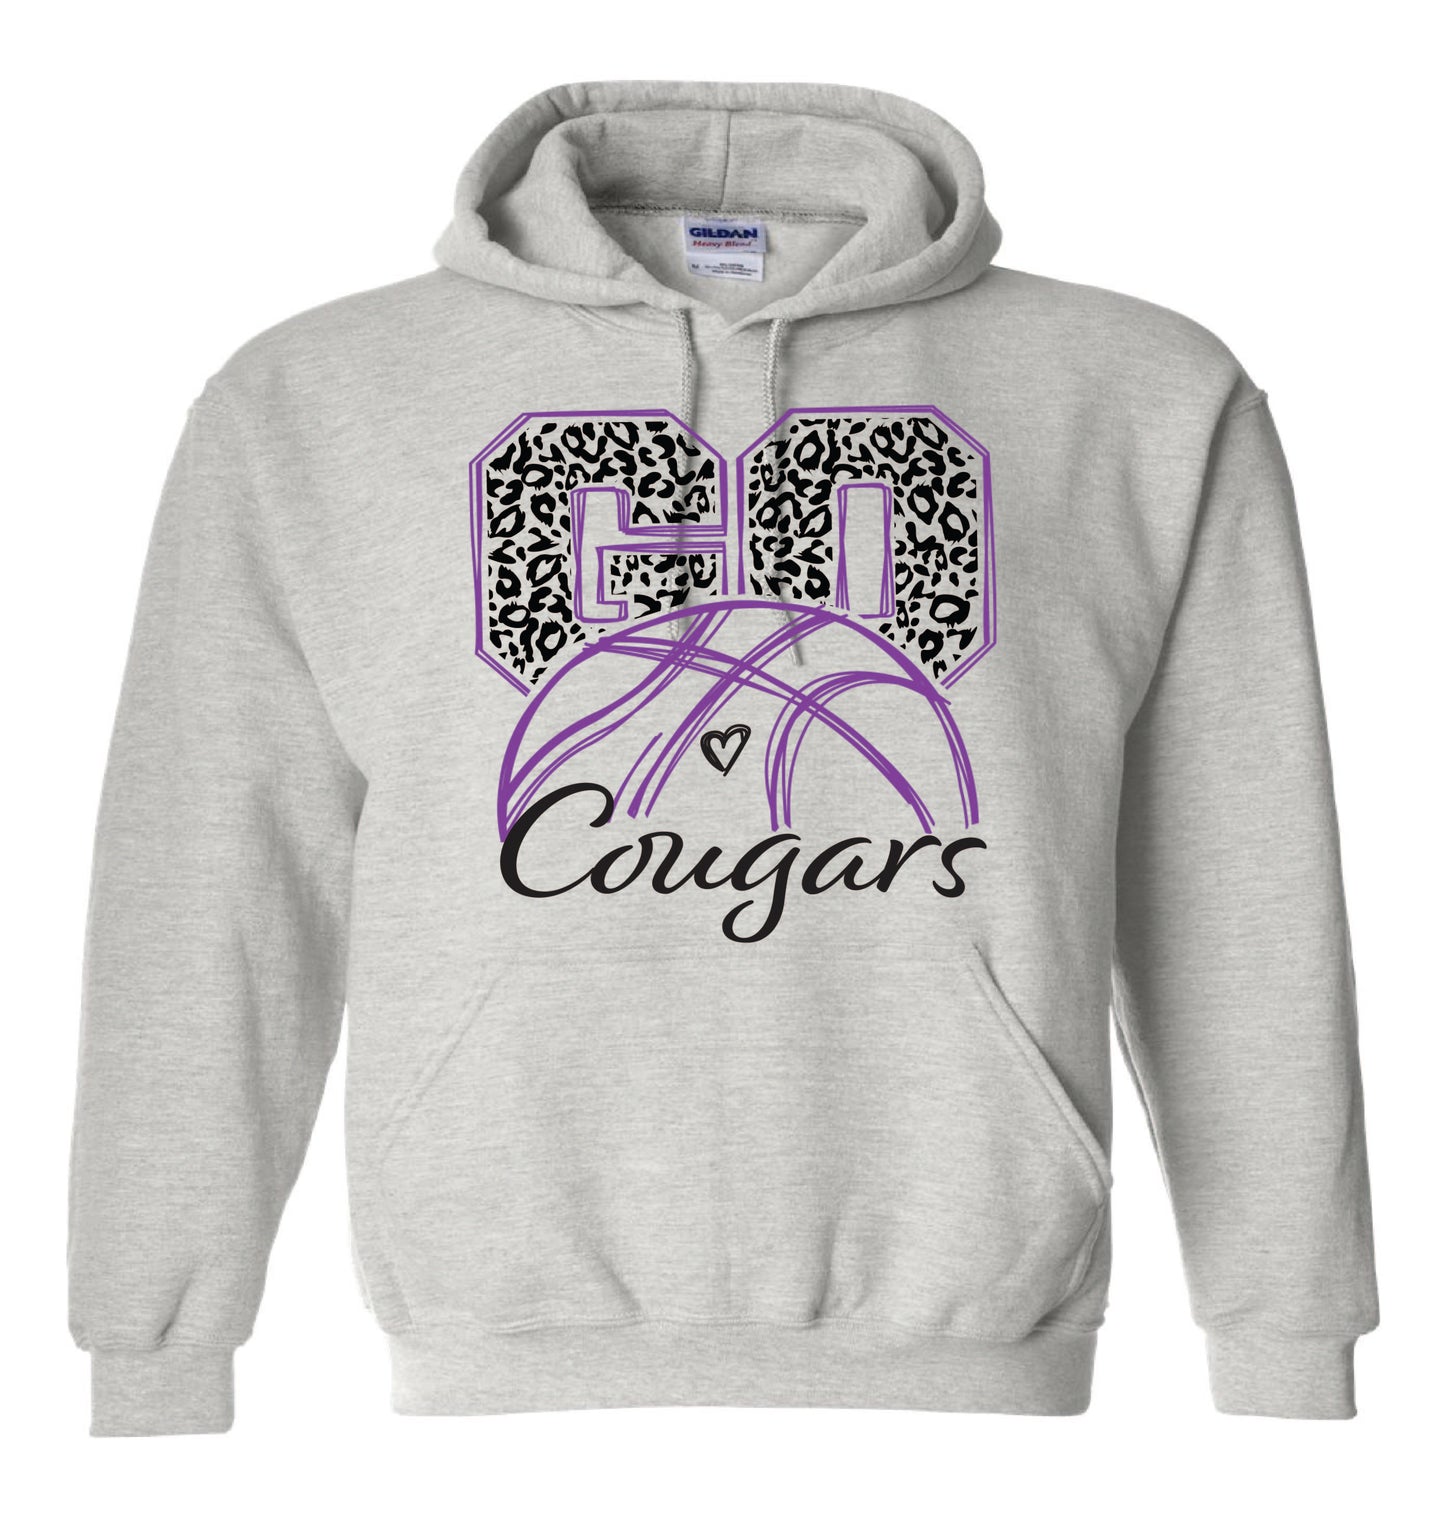 Wind River Go Cougars Basketball Hoodie